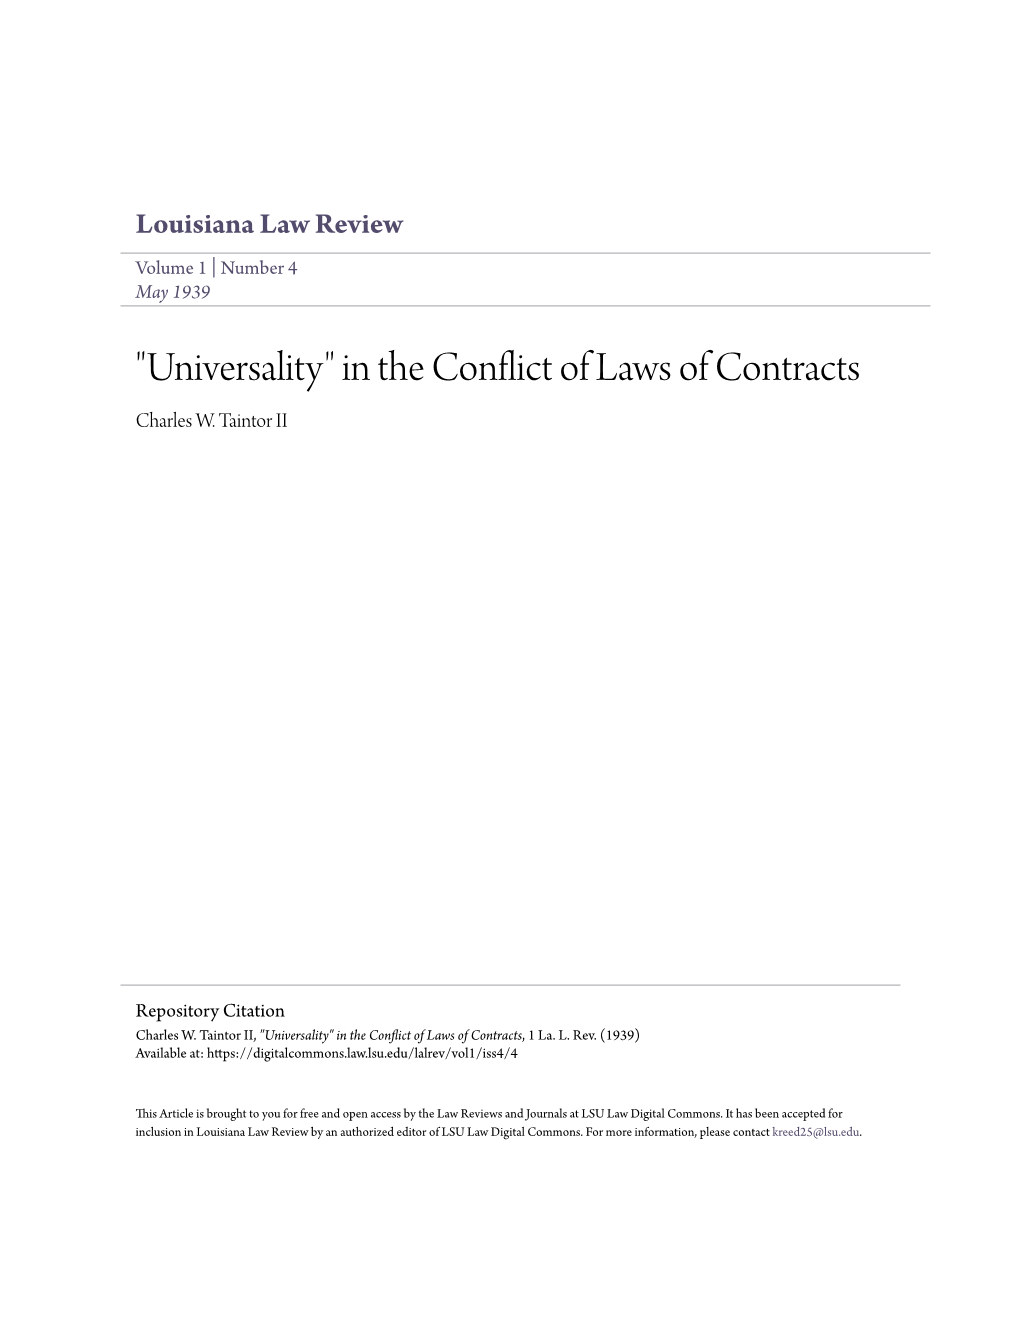 "Universality" in the Conflict of Laws of Contracts Charles W